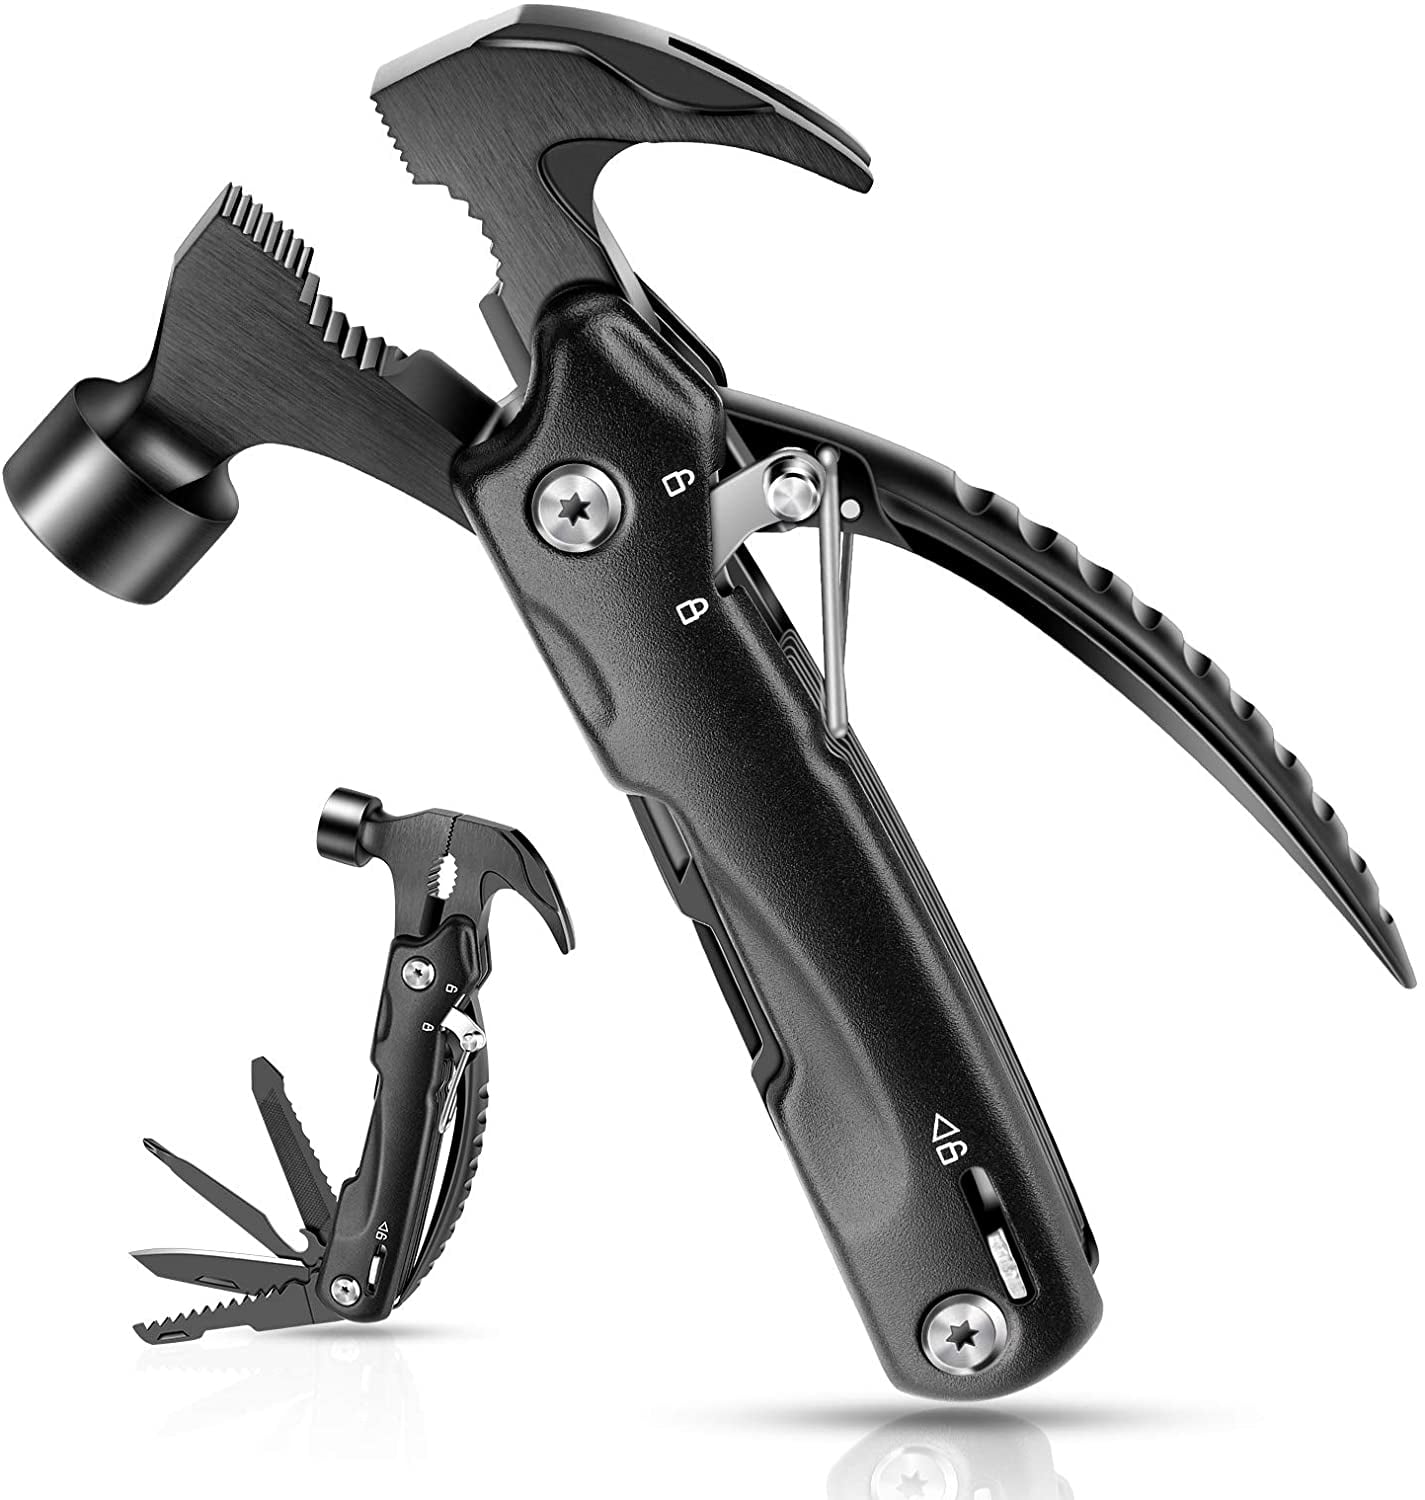 CHRISTMAS GIFT IDEA FOR HIM OUTDOOR MULTI FUNCTION FOLDING GADGET TOOLS PLIERS 